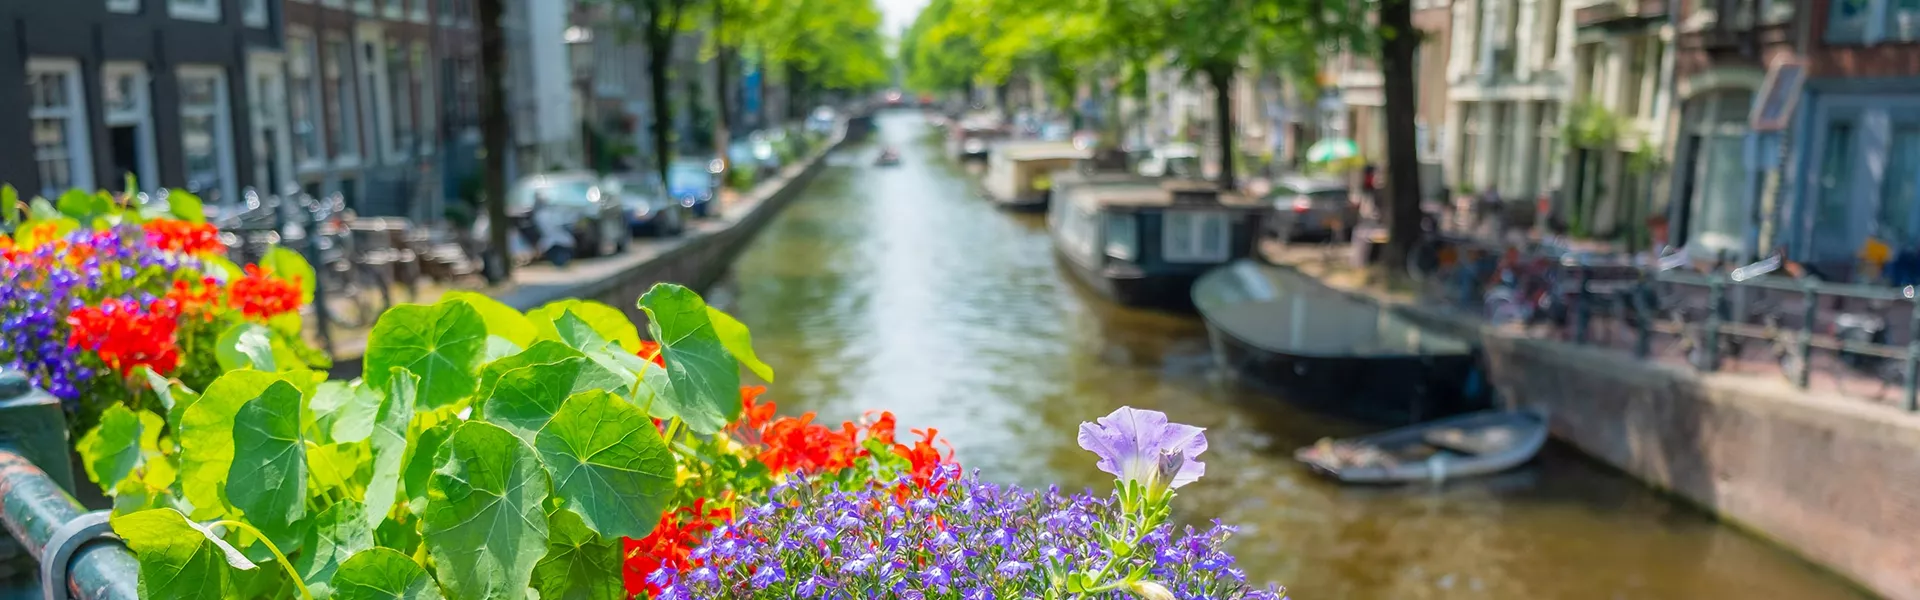 Canal and city landscape of Amsterdam in Netherlands